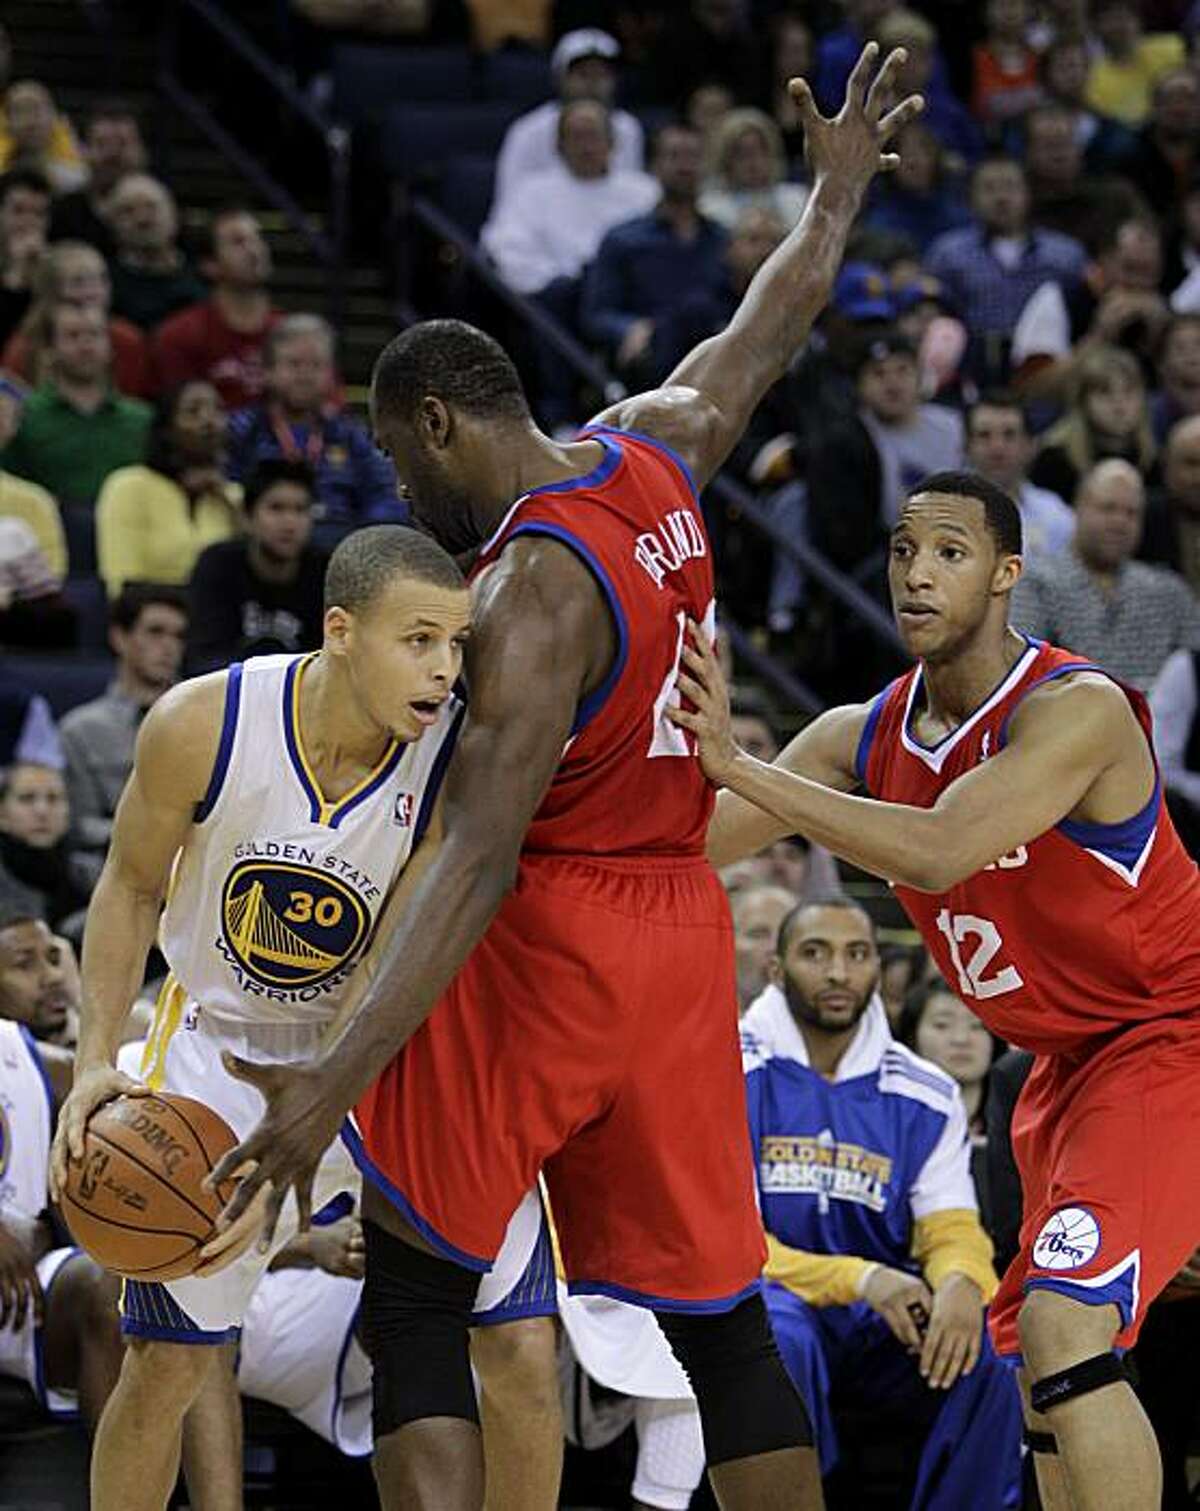 Golden State Warriors' Stephen Curry, left, looks for a way around Philadelphia 76ers' Elton Brand (42) and Evan Turner (12) during the first half of an NBA basketball game Monday, Dec. 27, 2010, in Oakland, Calif.